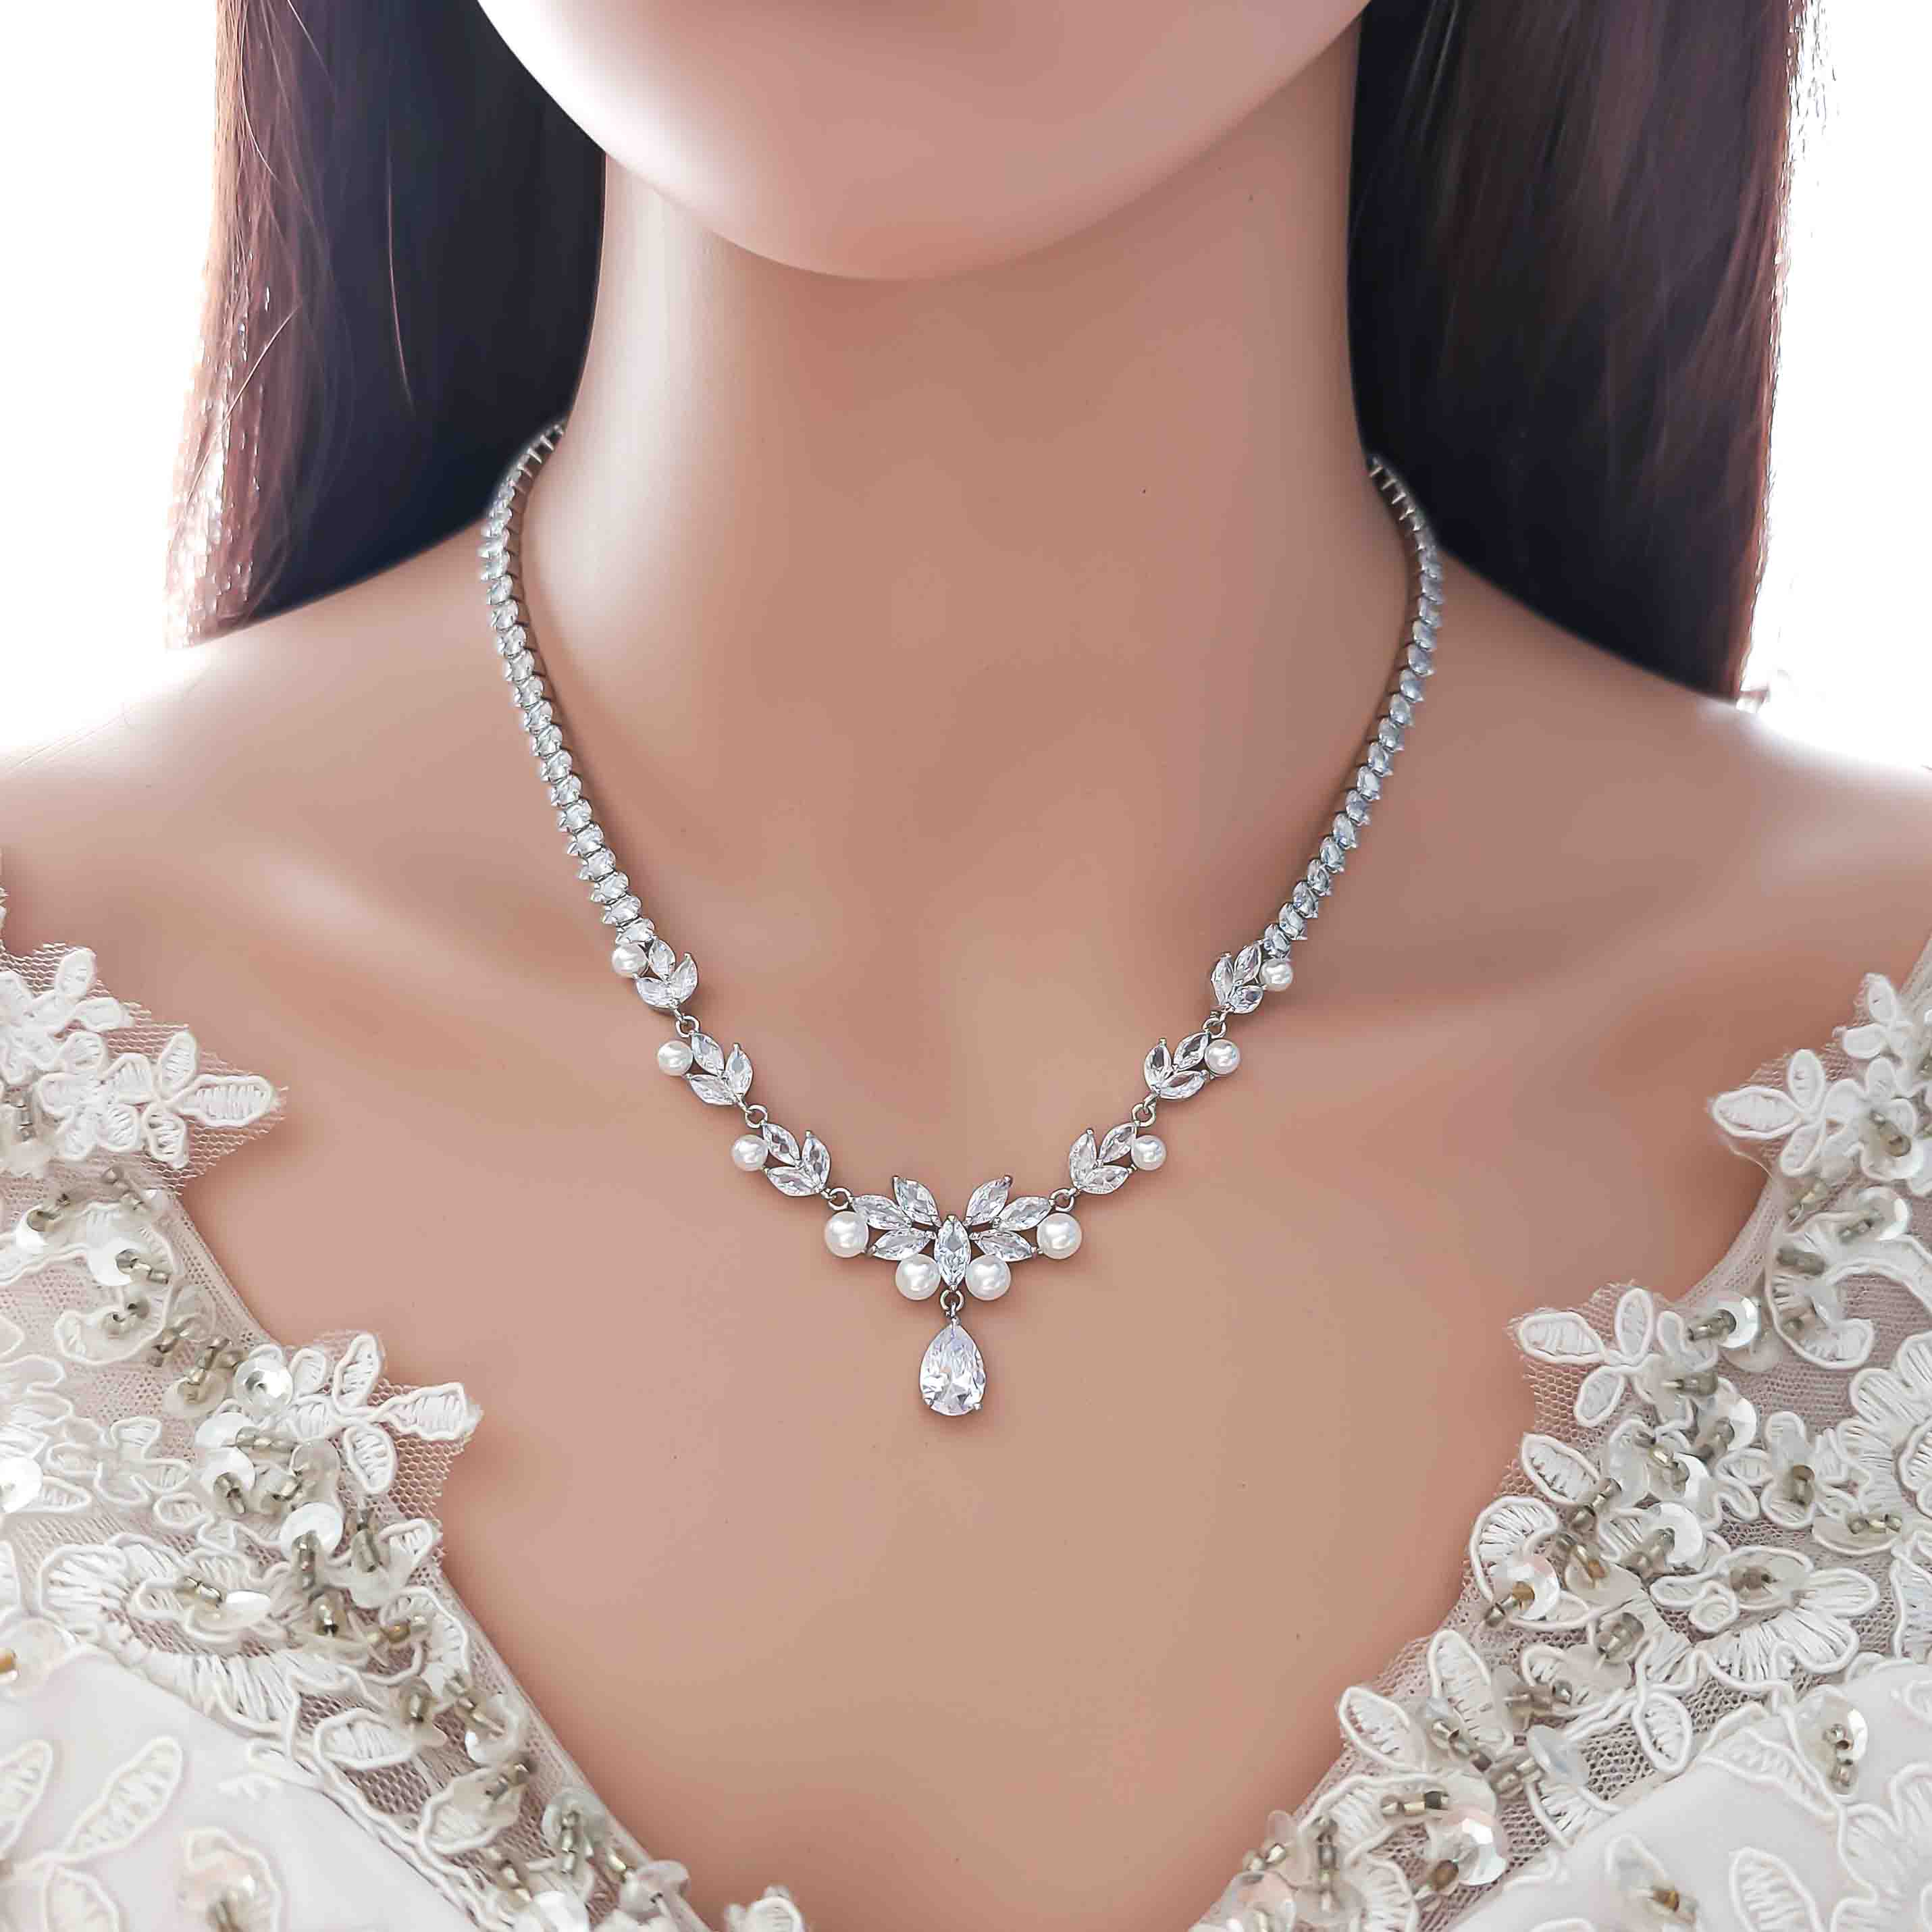 Buy EXPORA Wedding Crystal Diamond Pendant Necklace Bridal Party Prom  Accessory Silver at Amazon.in